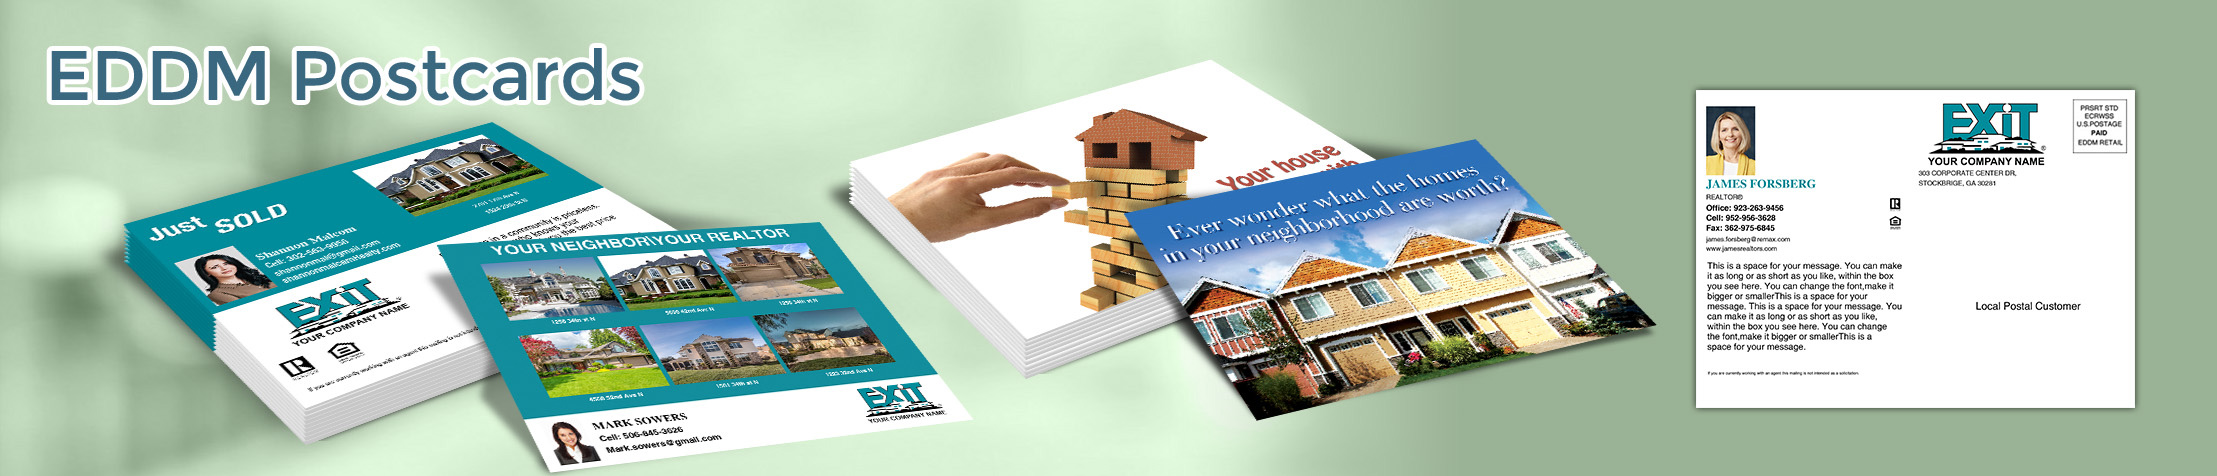 Exit Realty Real Estate EDDM Postcards - personalized Every Door Direct Mail Postcards | BestPrintBuy.com